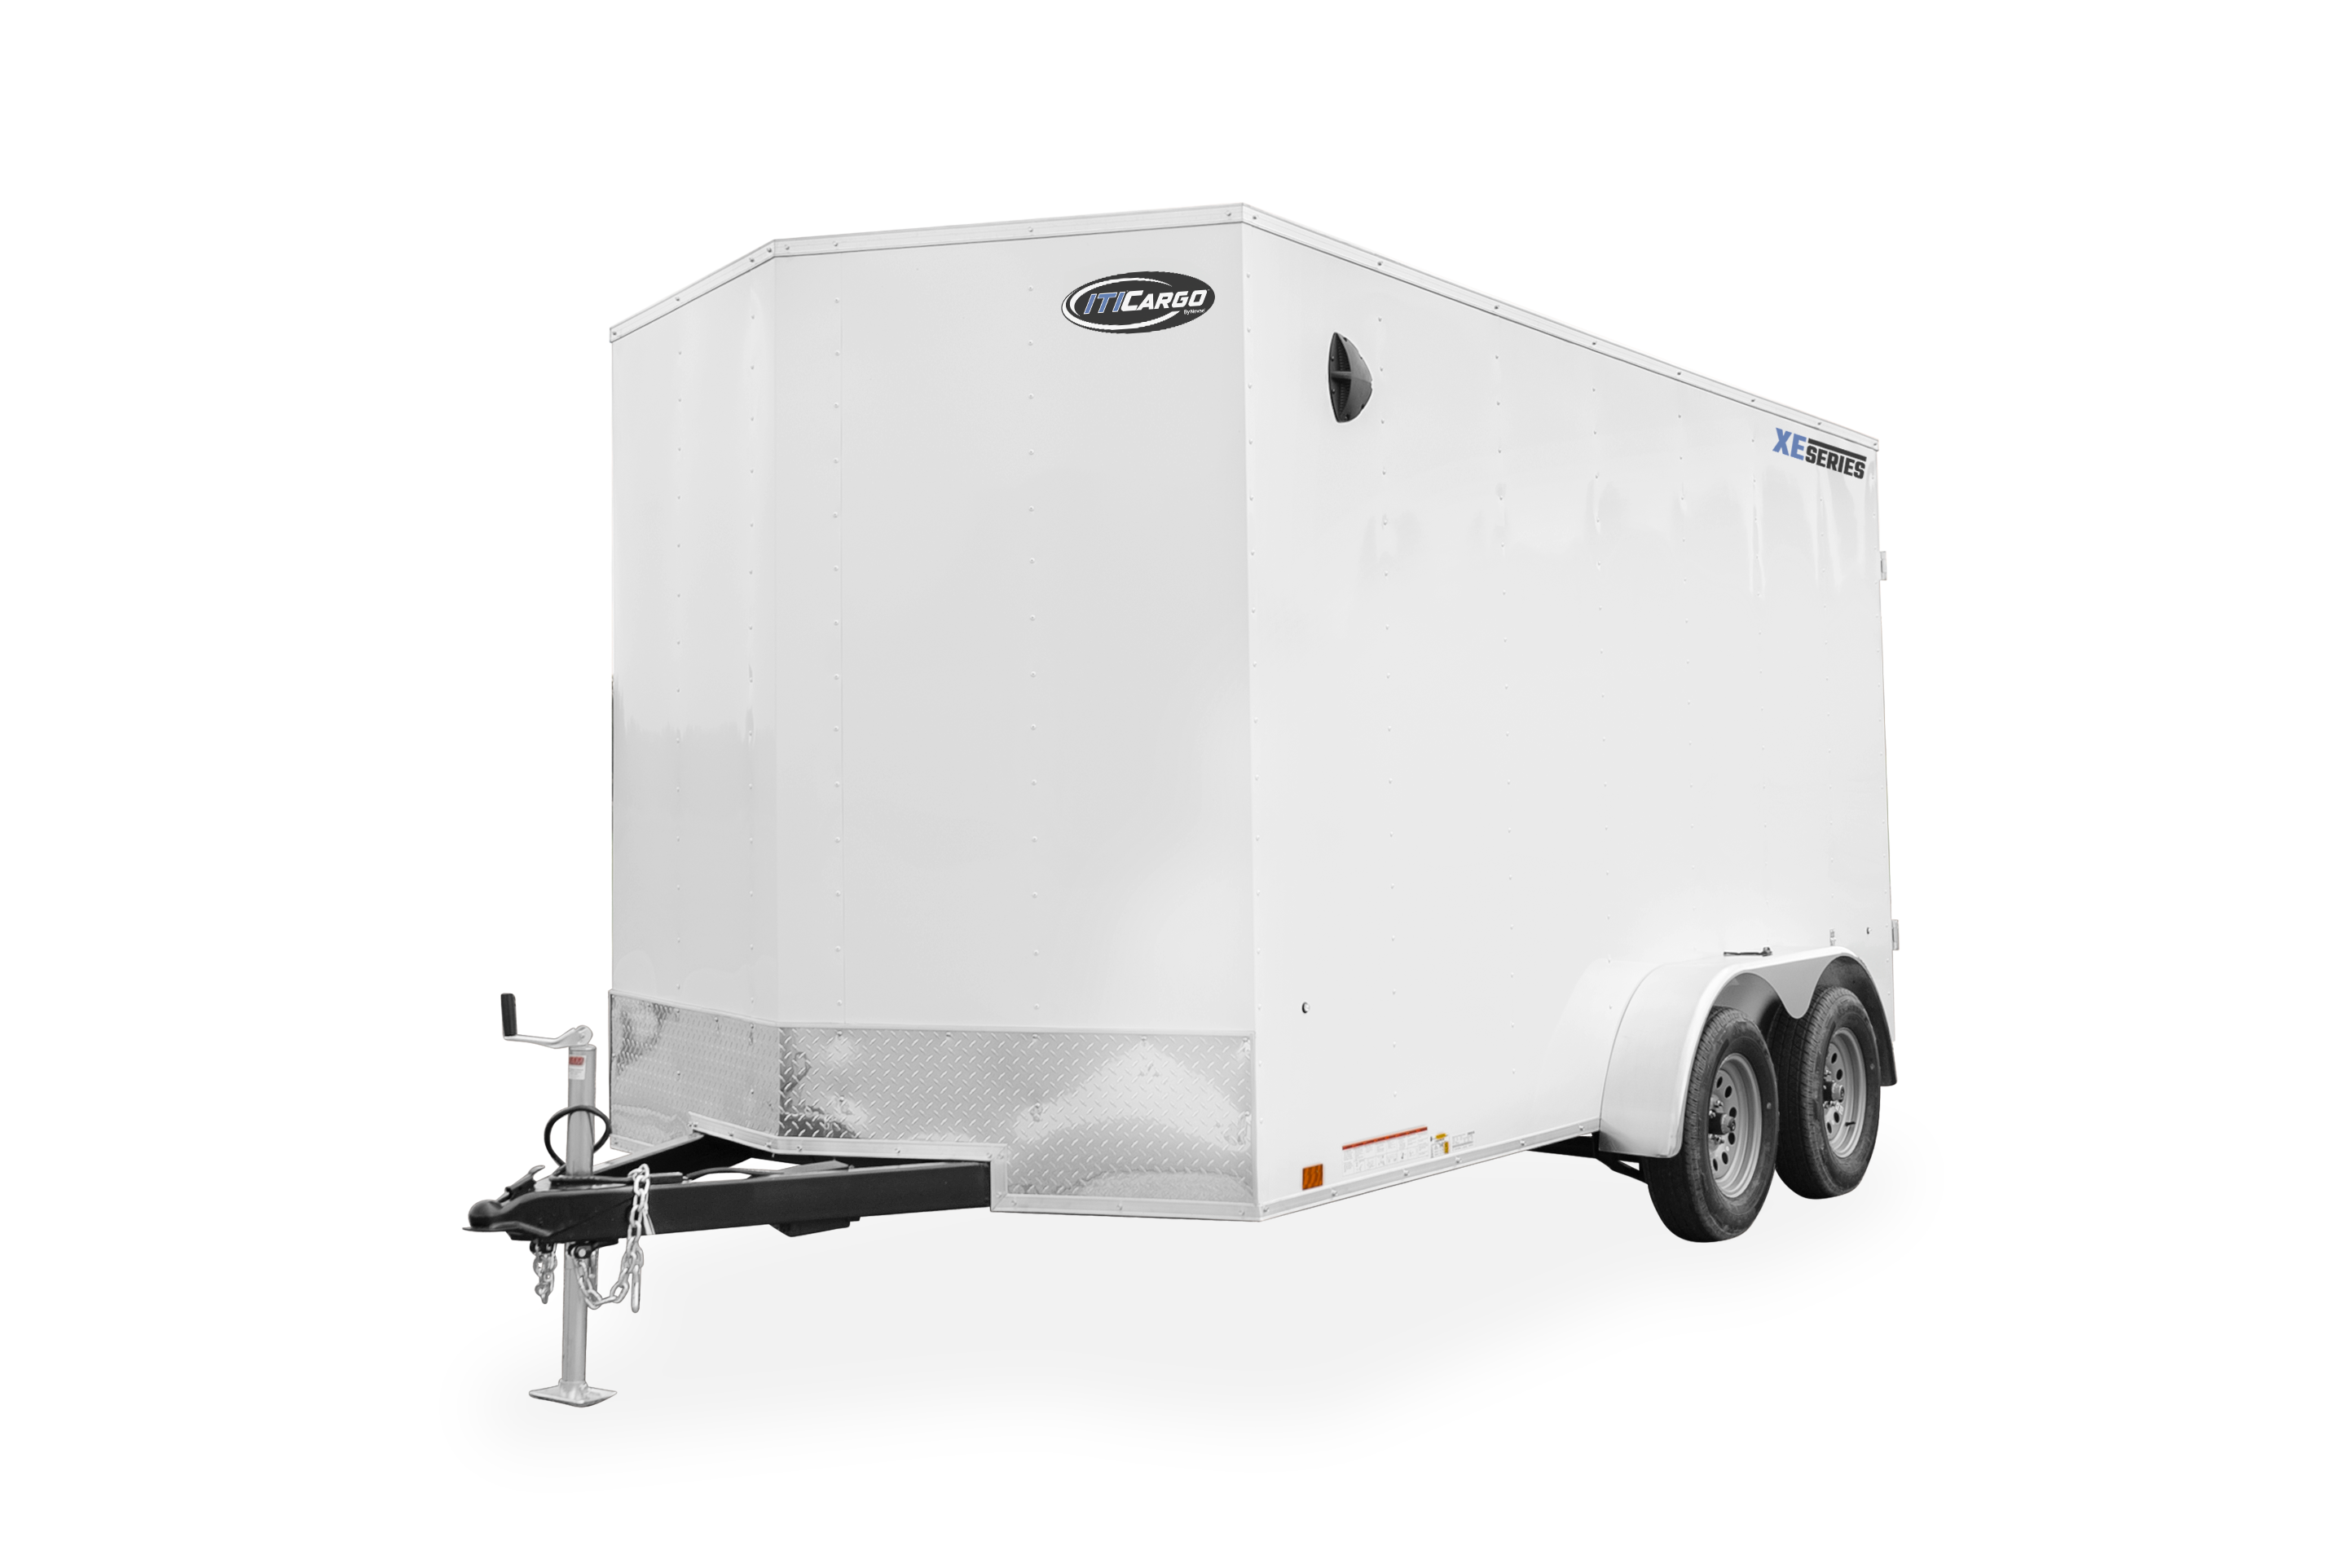 ITI Cargo Trailers | Products | Trailer Models | XE Cargo V-Nose Trailer | ITI Cargo Trailers | Products | Trailer Models | XE Cargo V-Nose Trailer | Image of white enclosed cargo trailer with dual axles showing left front of trailer clear background | Image 1